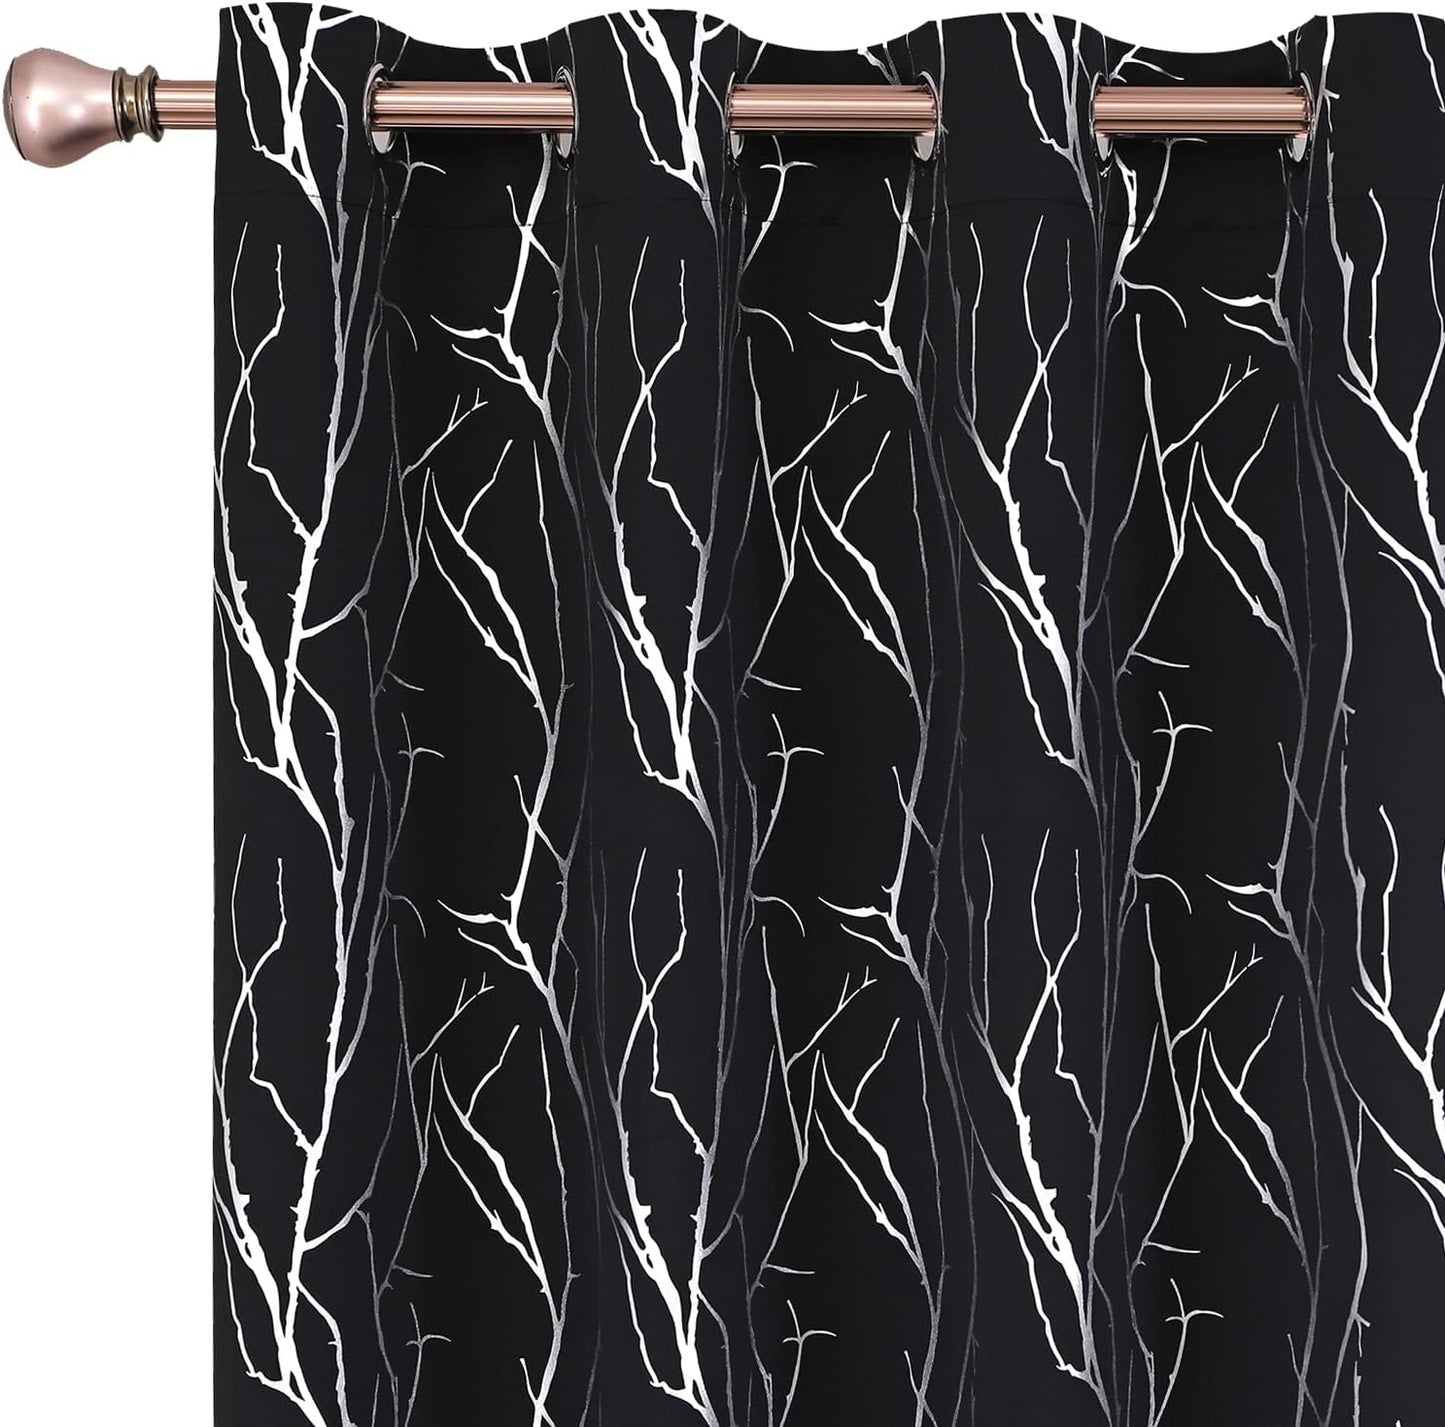 SMILE WEAVER Black Blackout Curtains for Bedroom 72 Inch Long 2 Panels,Room Darkening Curtain with Gold Print Design Noise Reducing Thermal Insulated Window Treatment Drapes for Living Room  SMILE WEAVER Tree Branch-Black 52Wx72L 